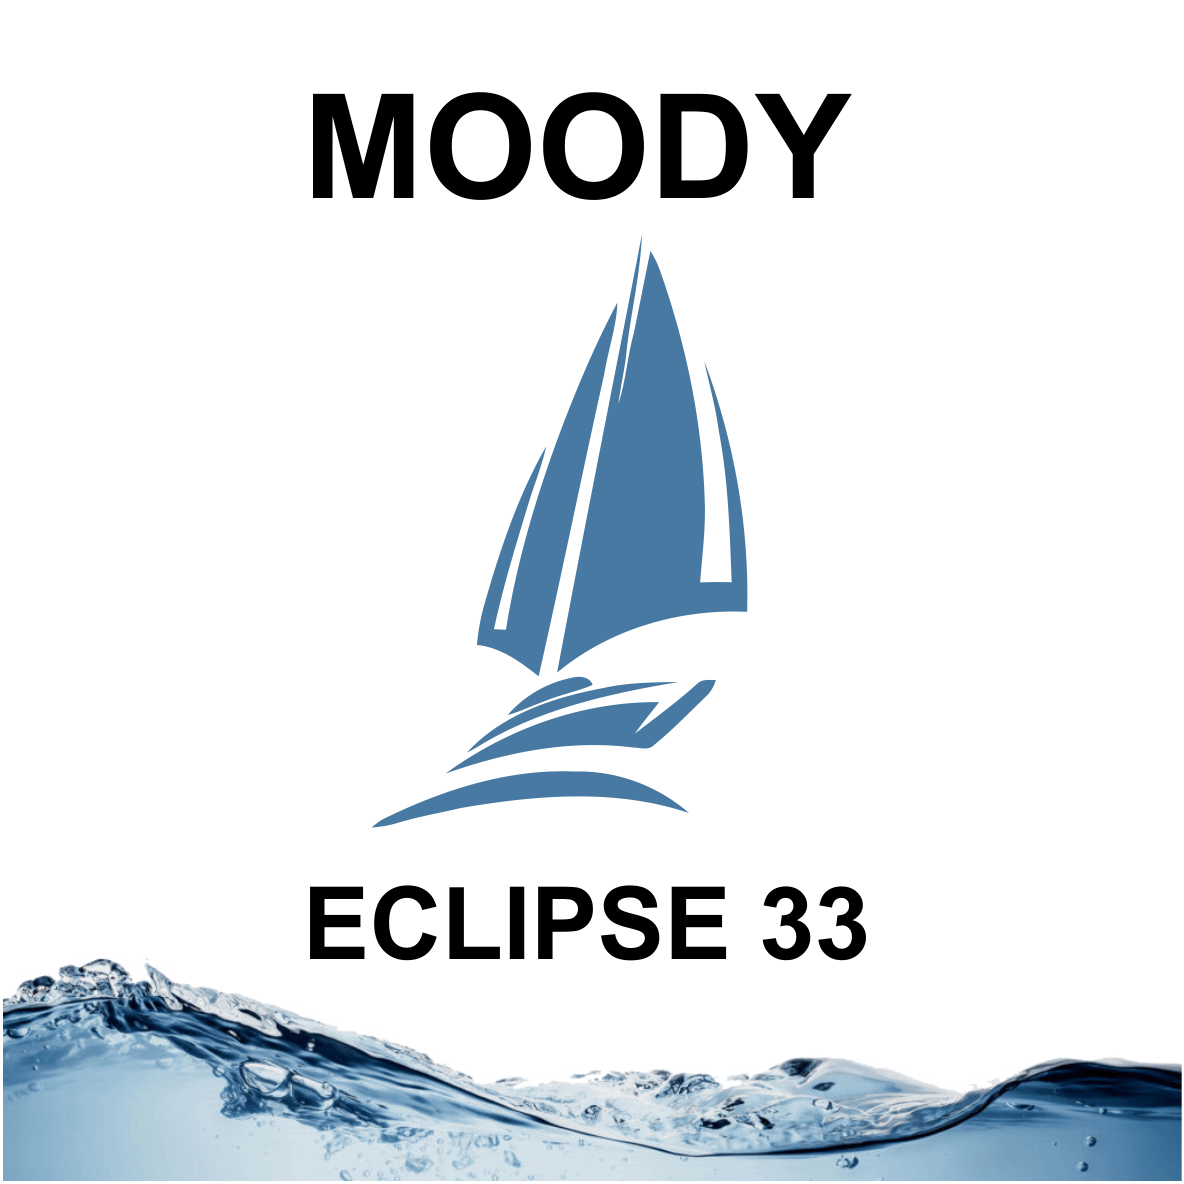 Moody Eclipse 33